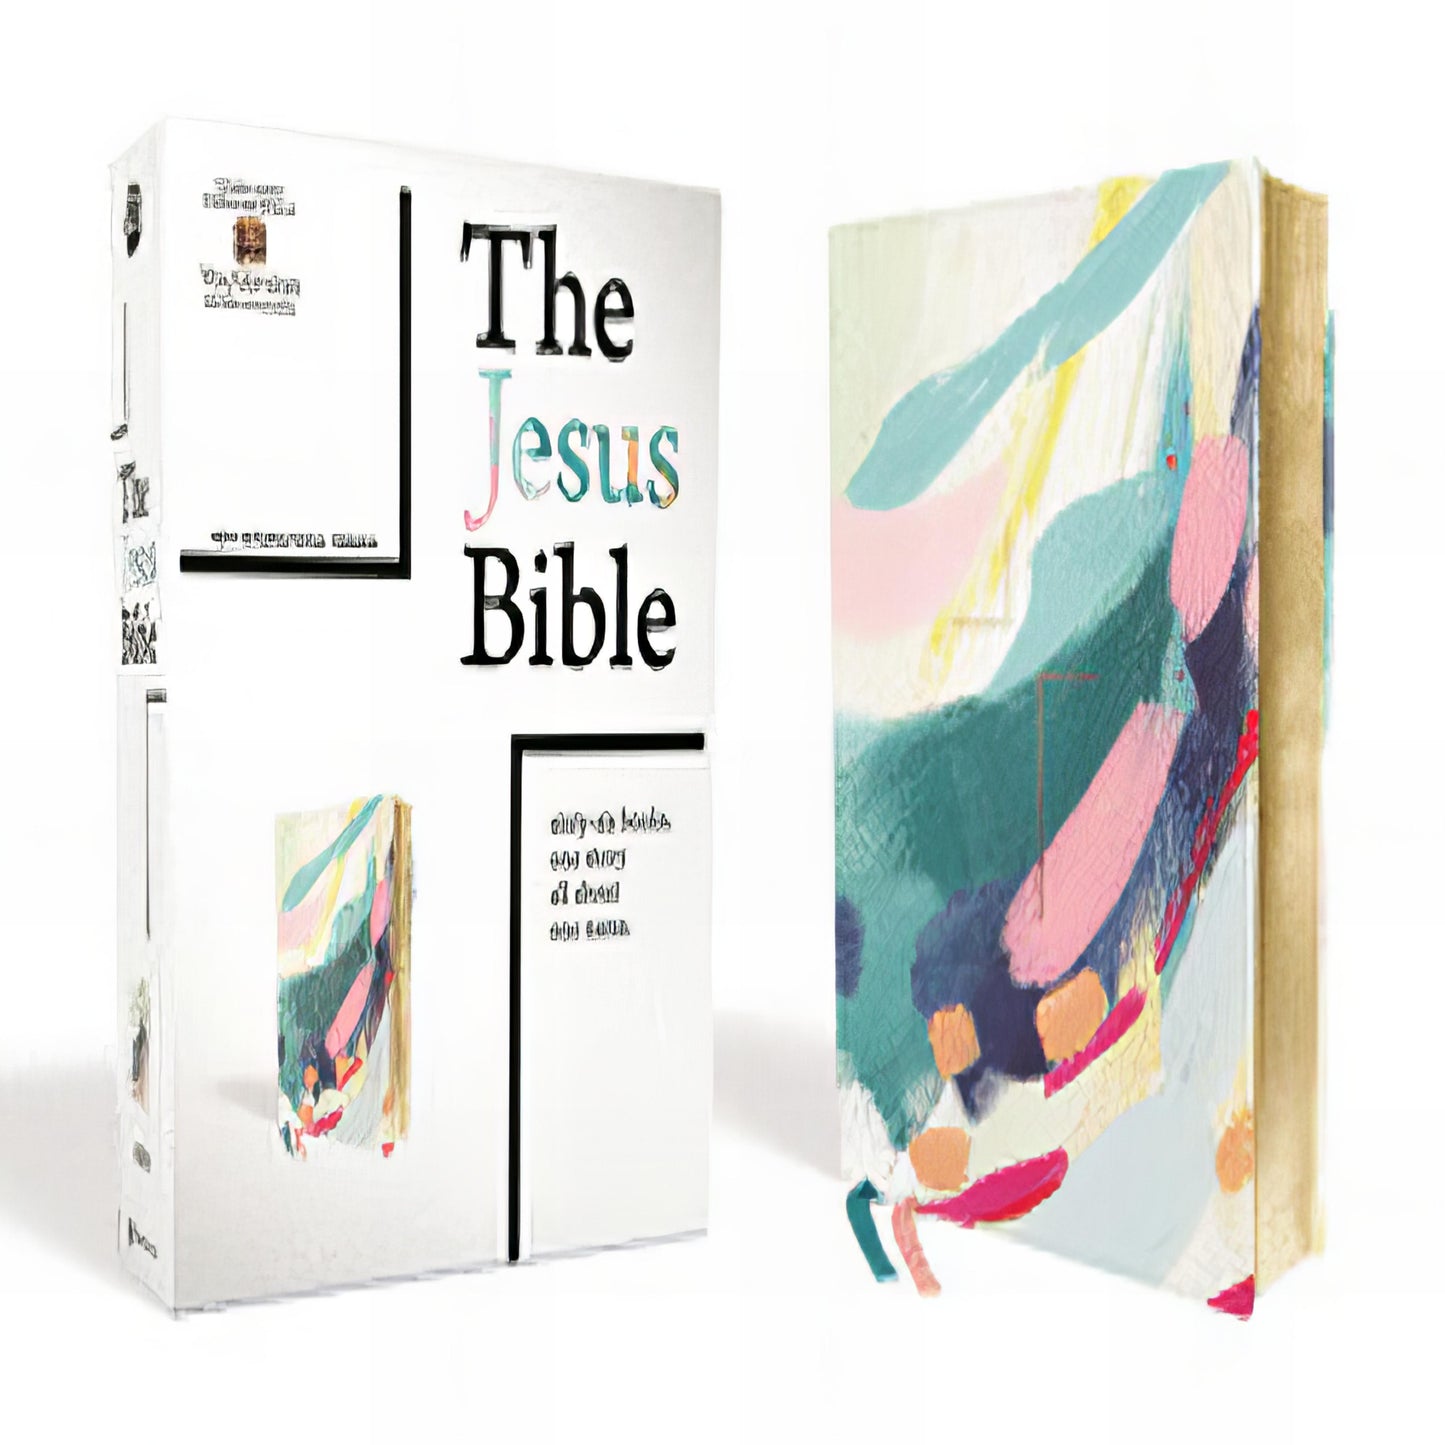 TEXTBOOK The Jesus Bible, NIV Edition, Leathersoft, Multi-Color/Teal, Comfort Print